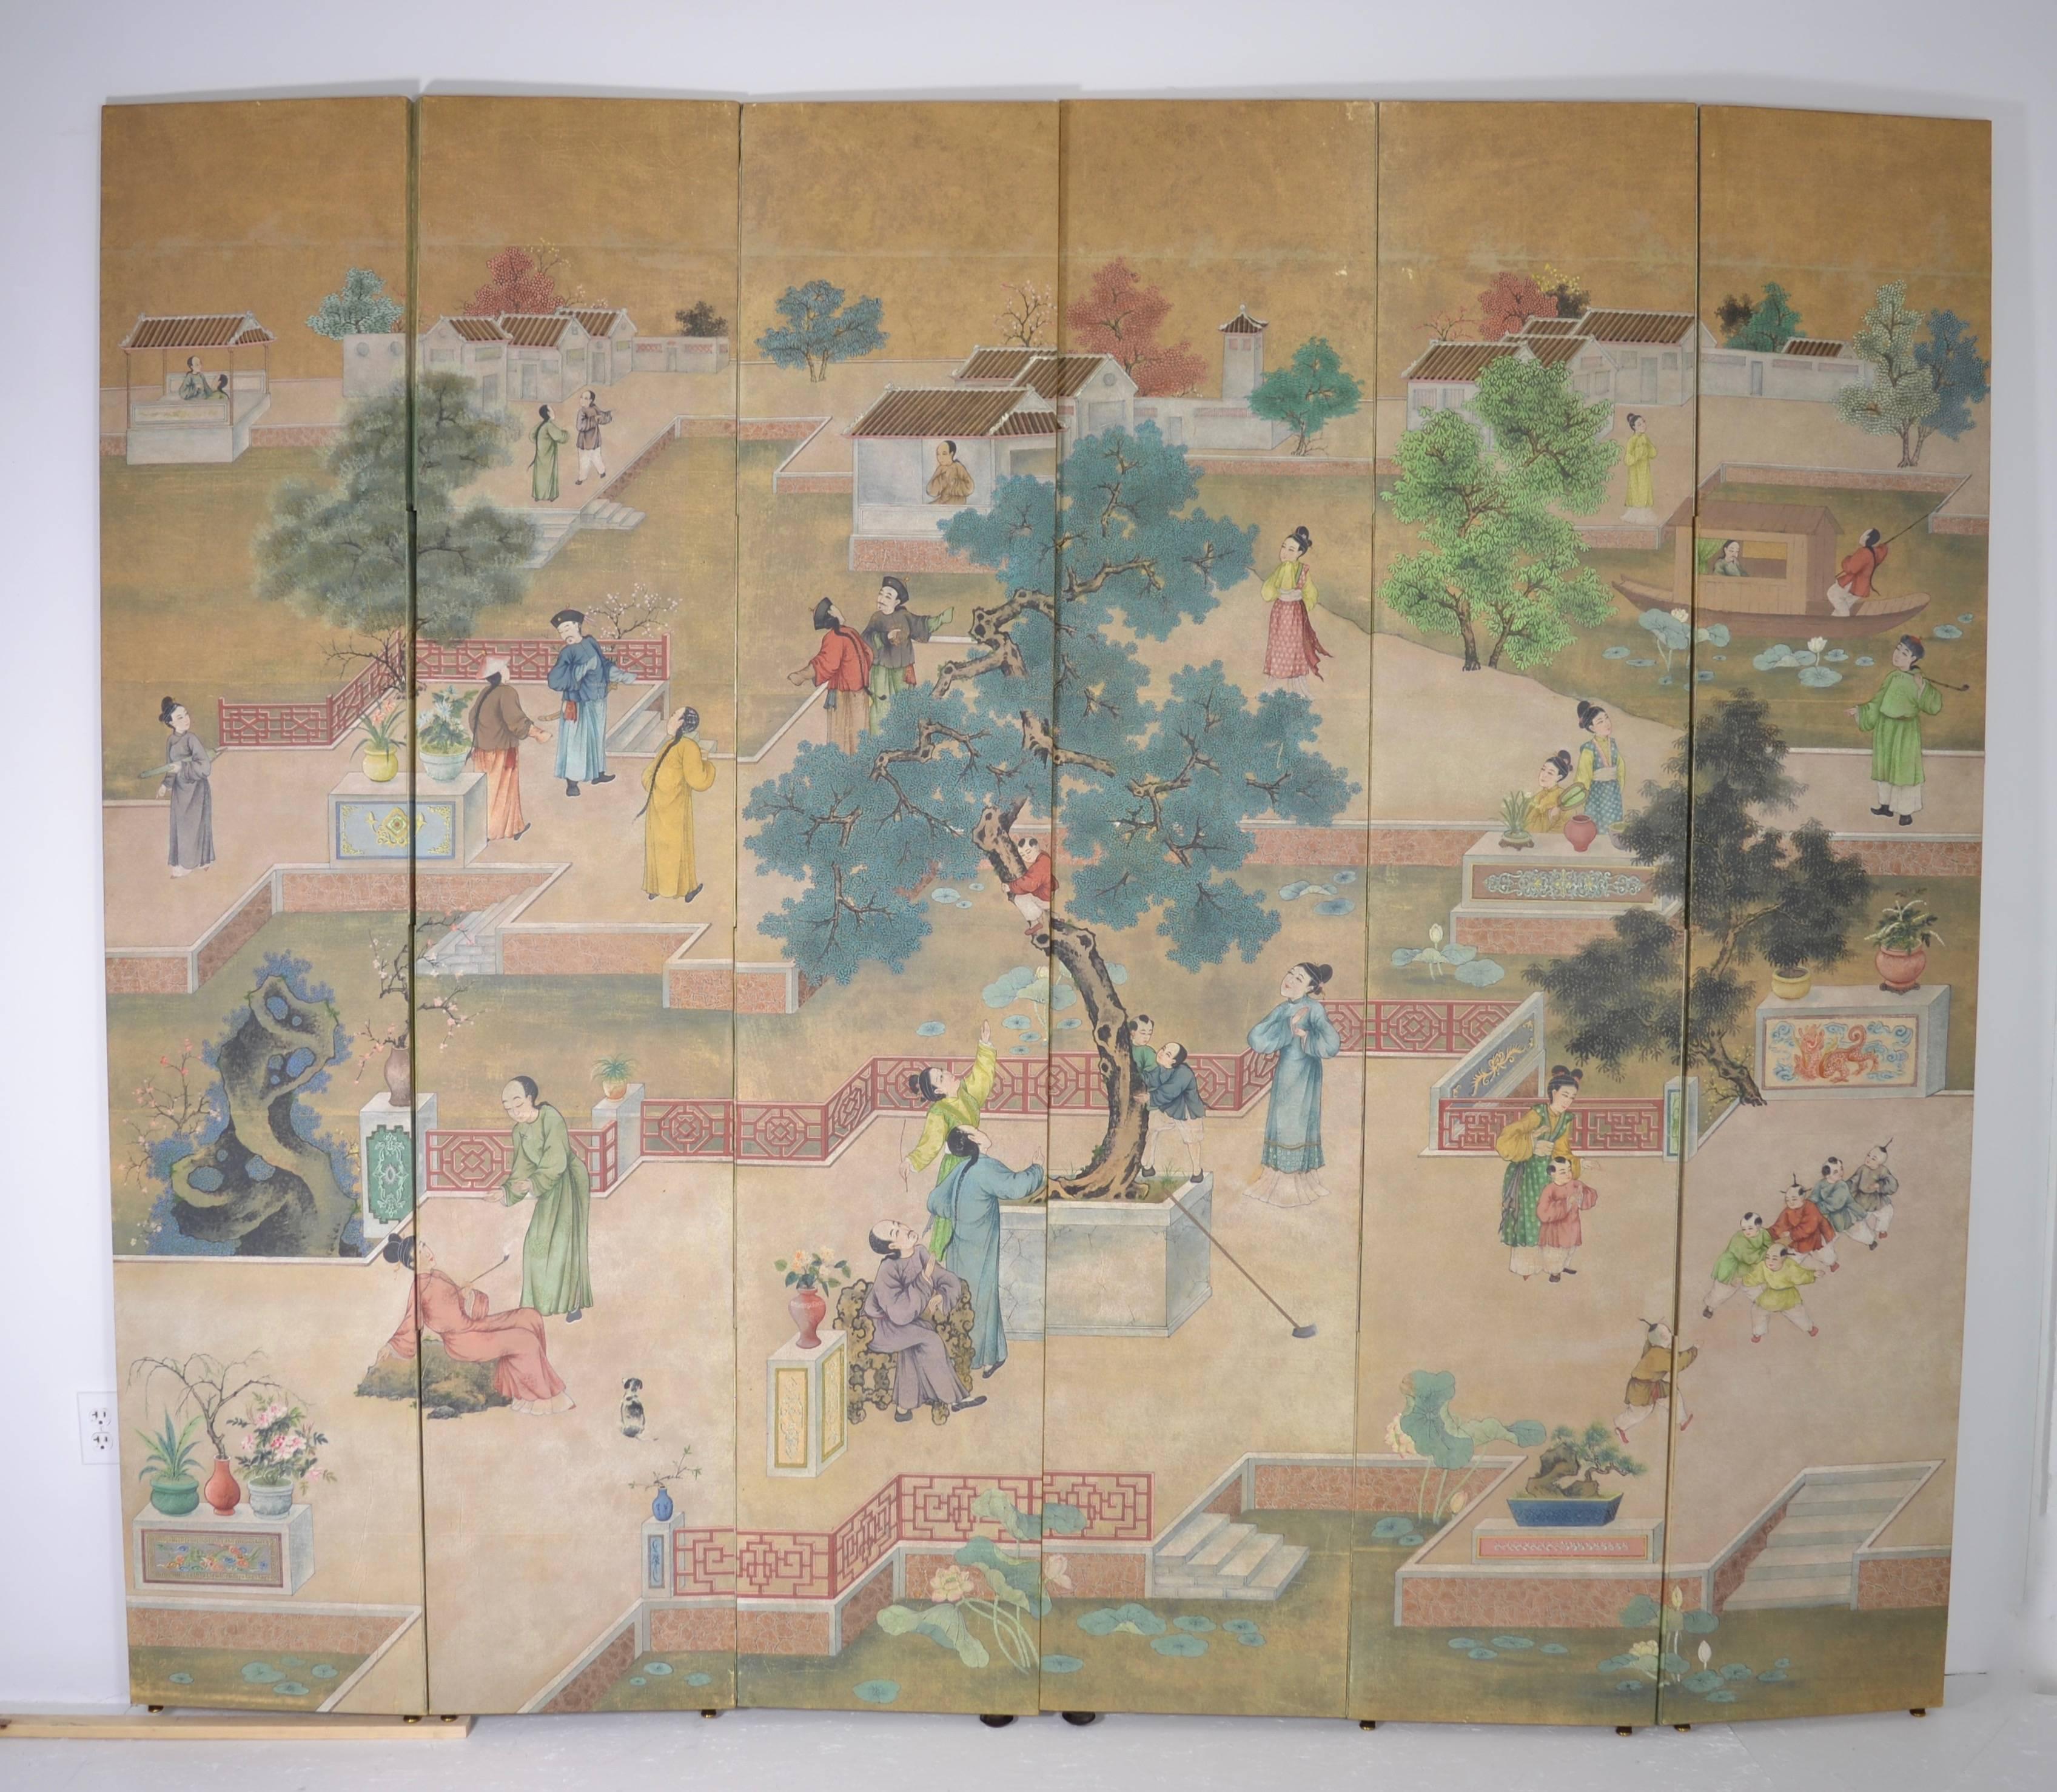 Beautifully hand-painted with genre scenes, a wall paper mural applied to six screen panels. Verso is the distinctive Gracie gilt patch paper, circa 1980s. In excellent condition. Currently in two three-panel sections; easily connected if desired.